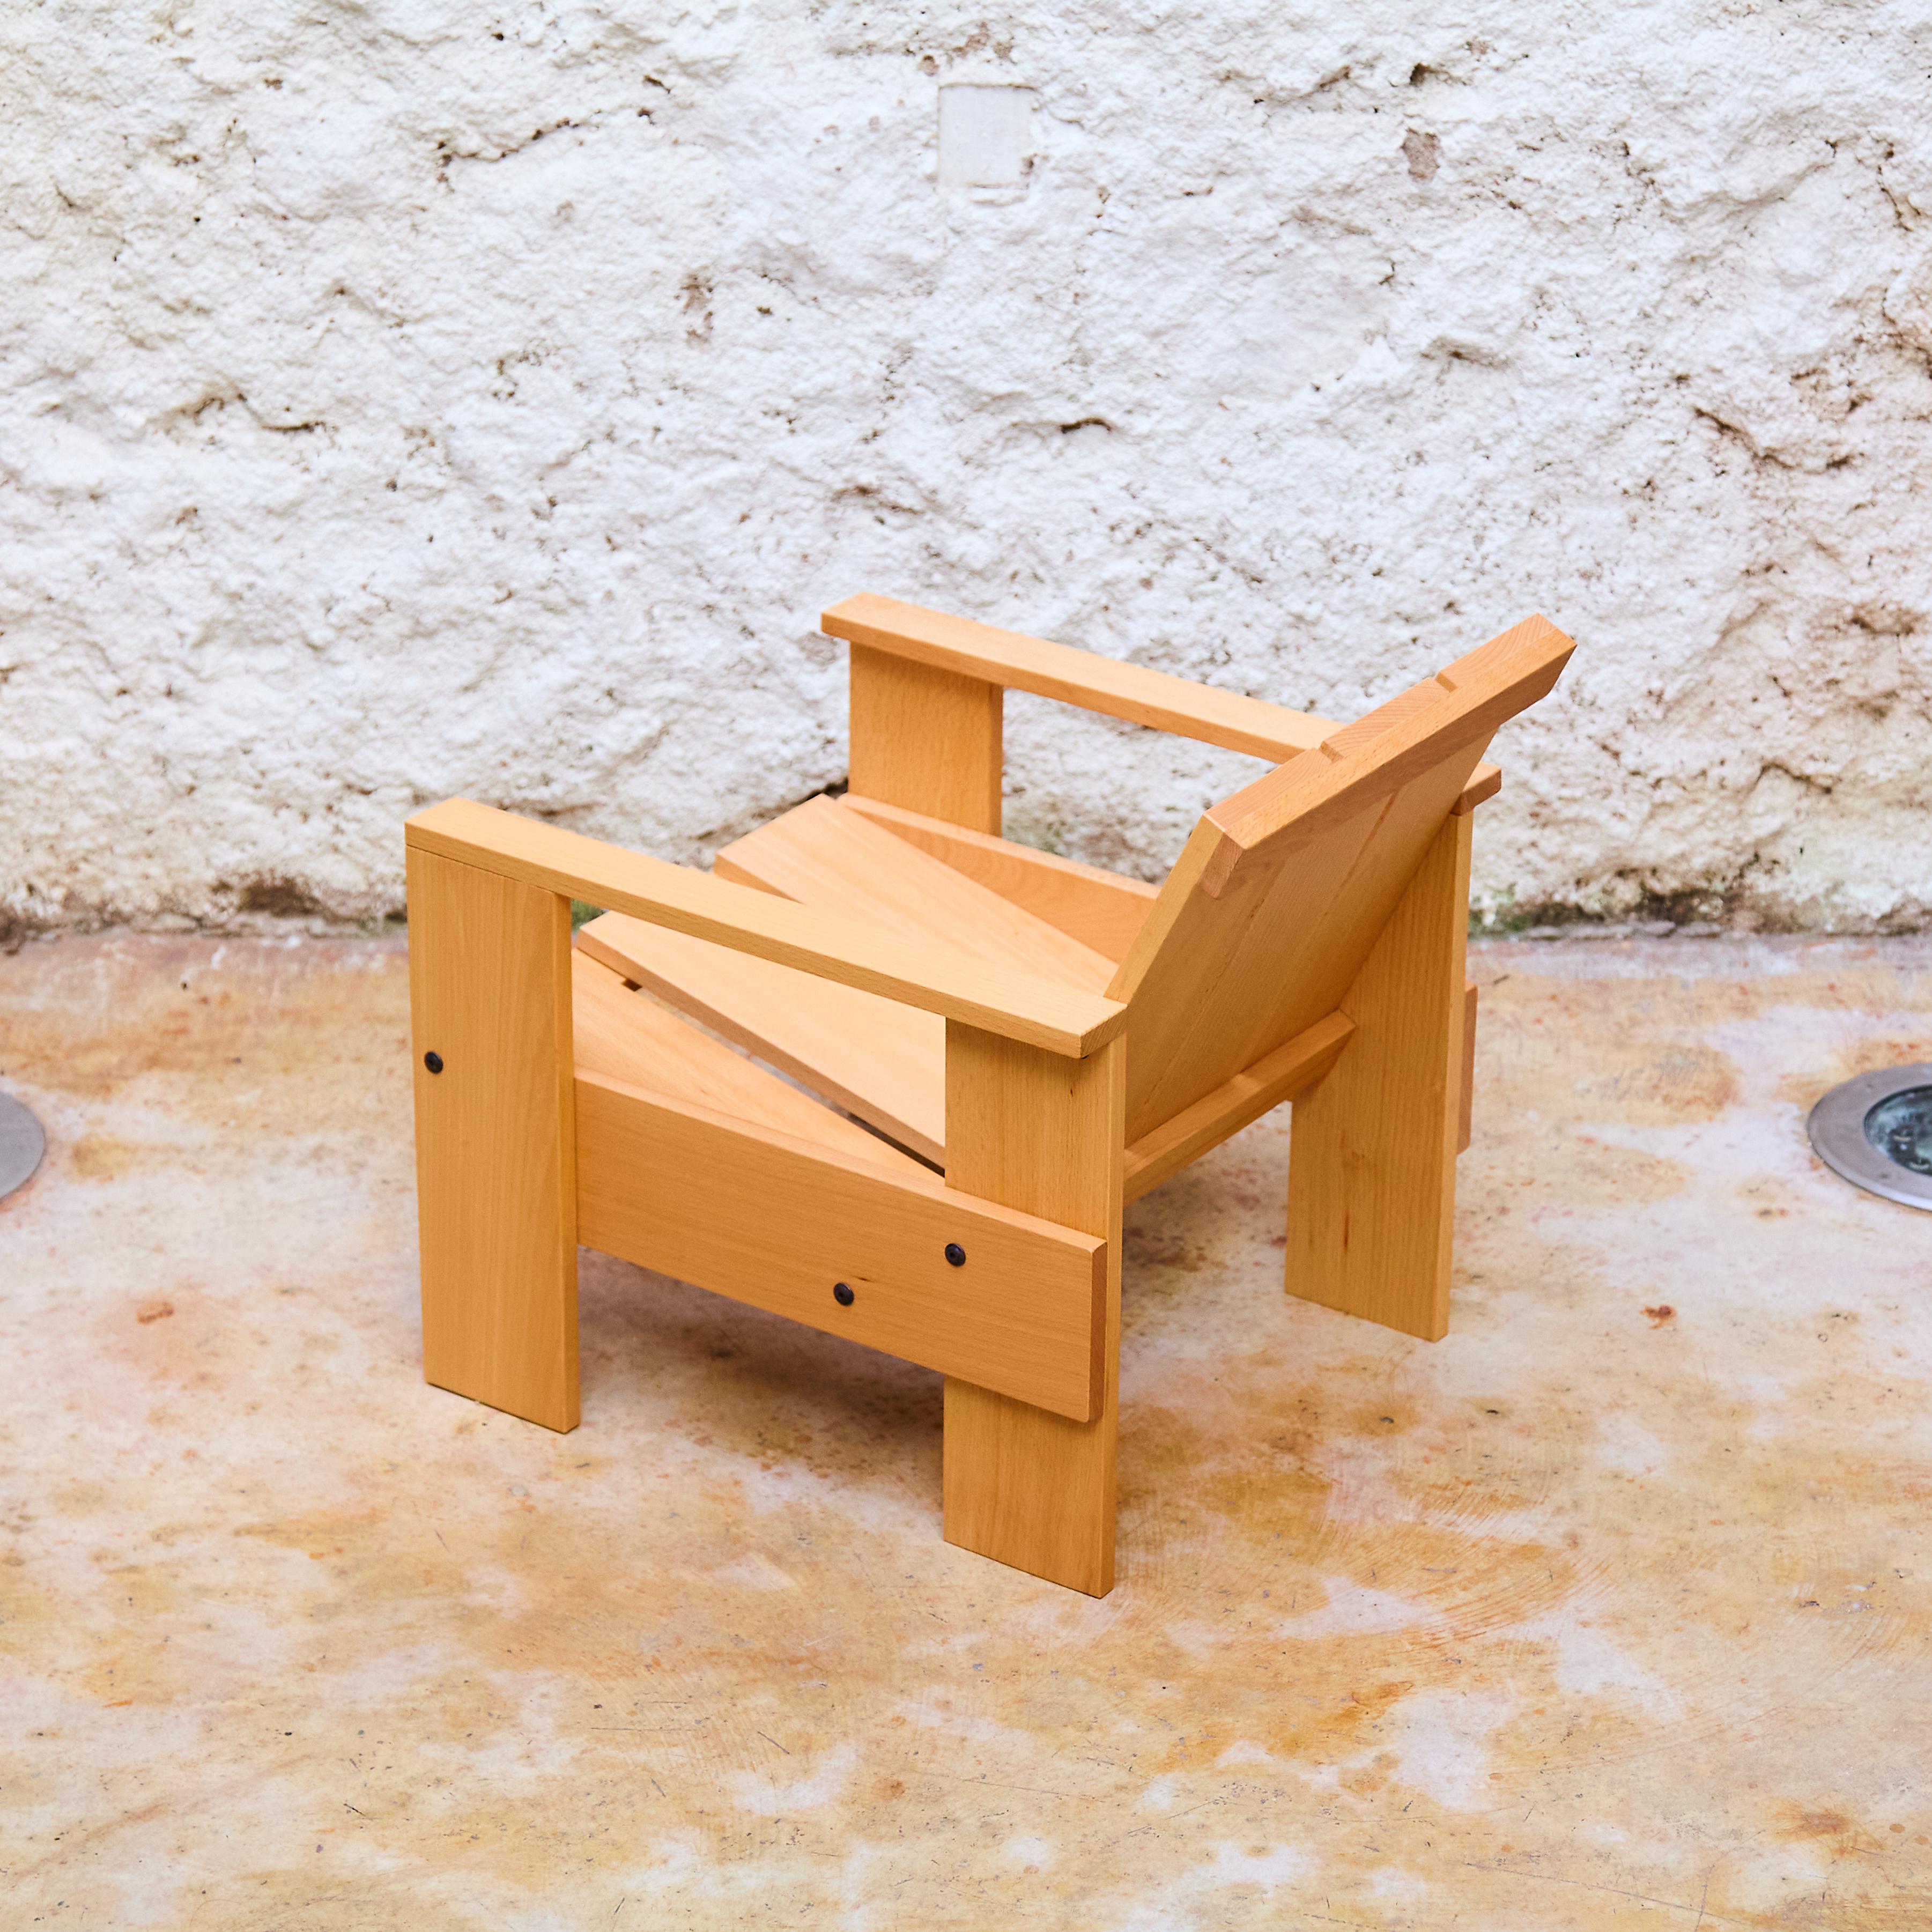 Gerrit Rietveld Wood Child Armchair 'Crate' by Rietveld by Rietveld, circa 2005 For Sale 1